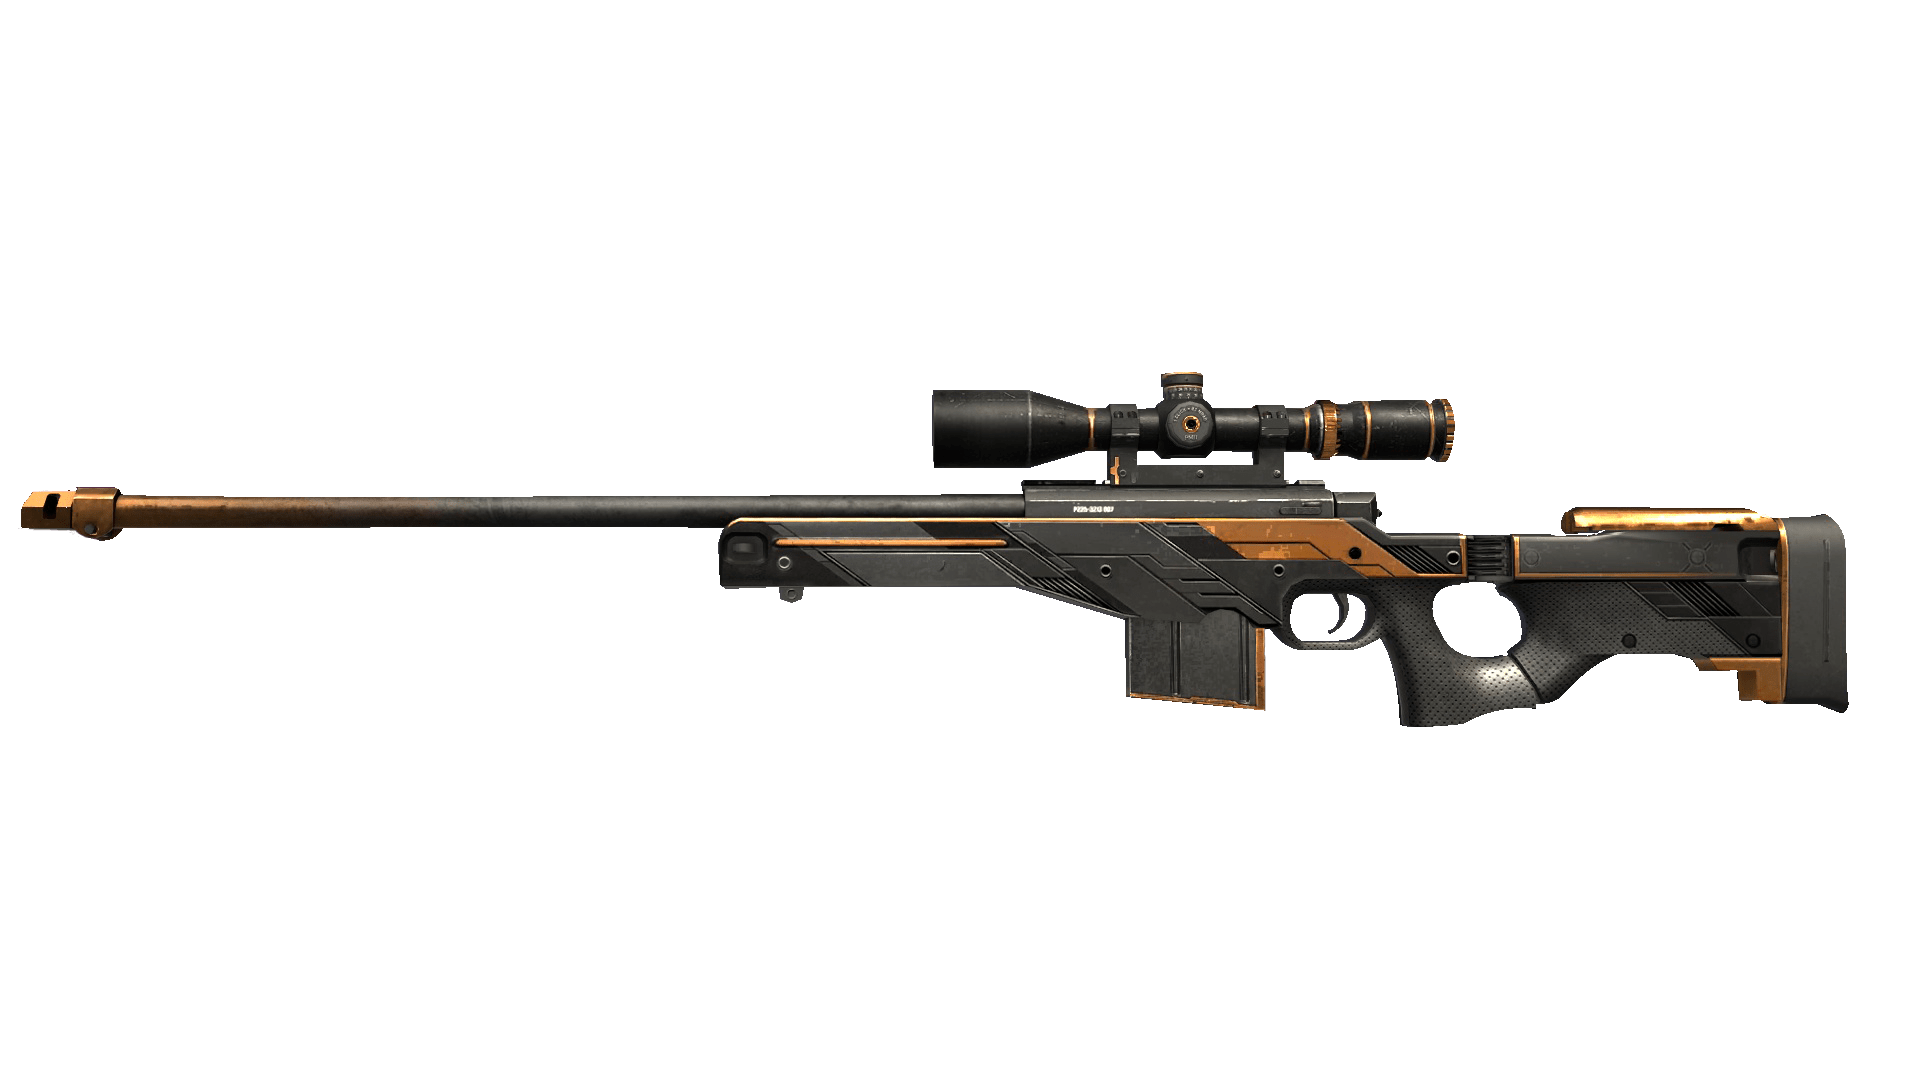 Awp cannons карта мастерская фото 76